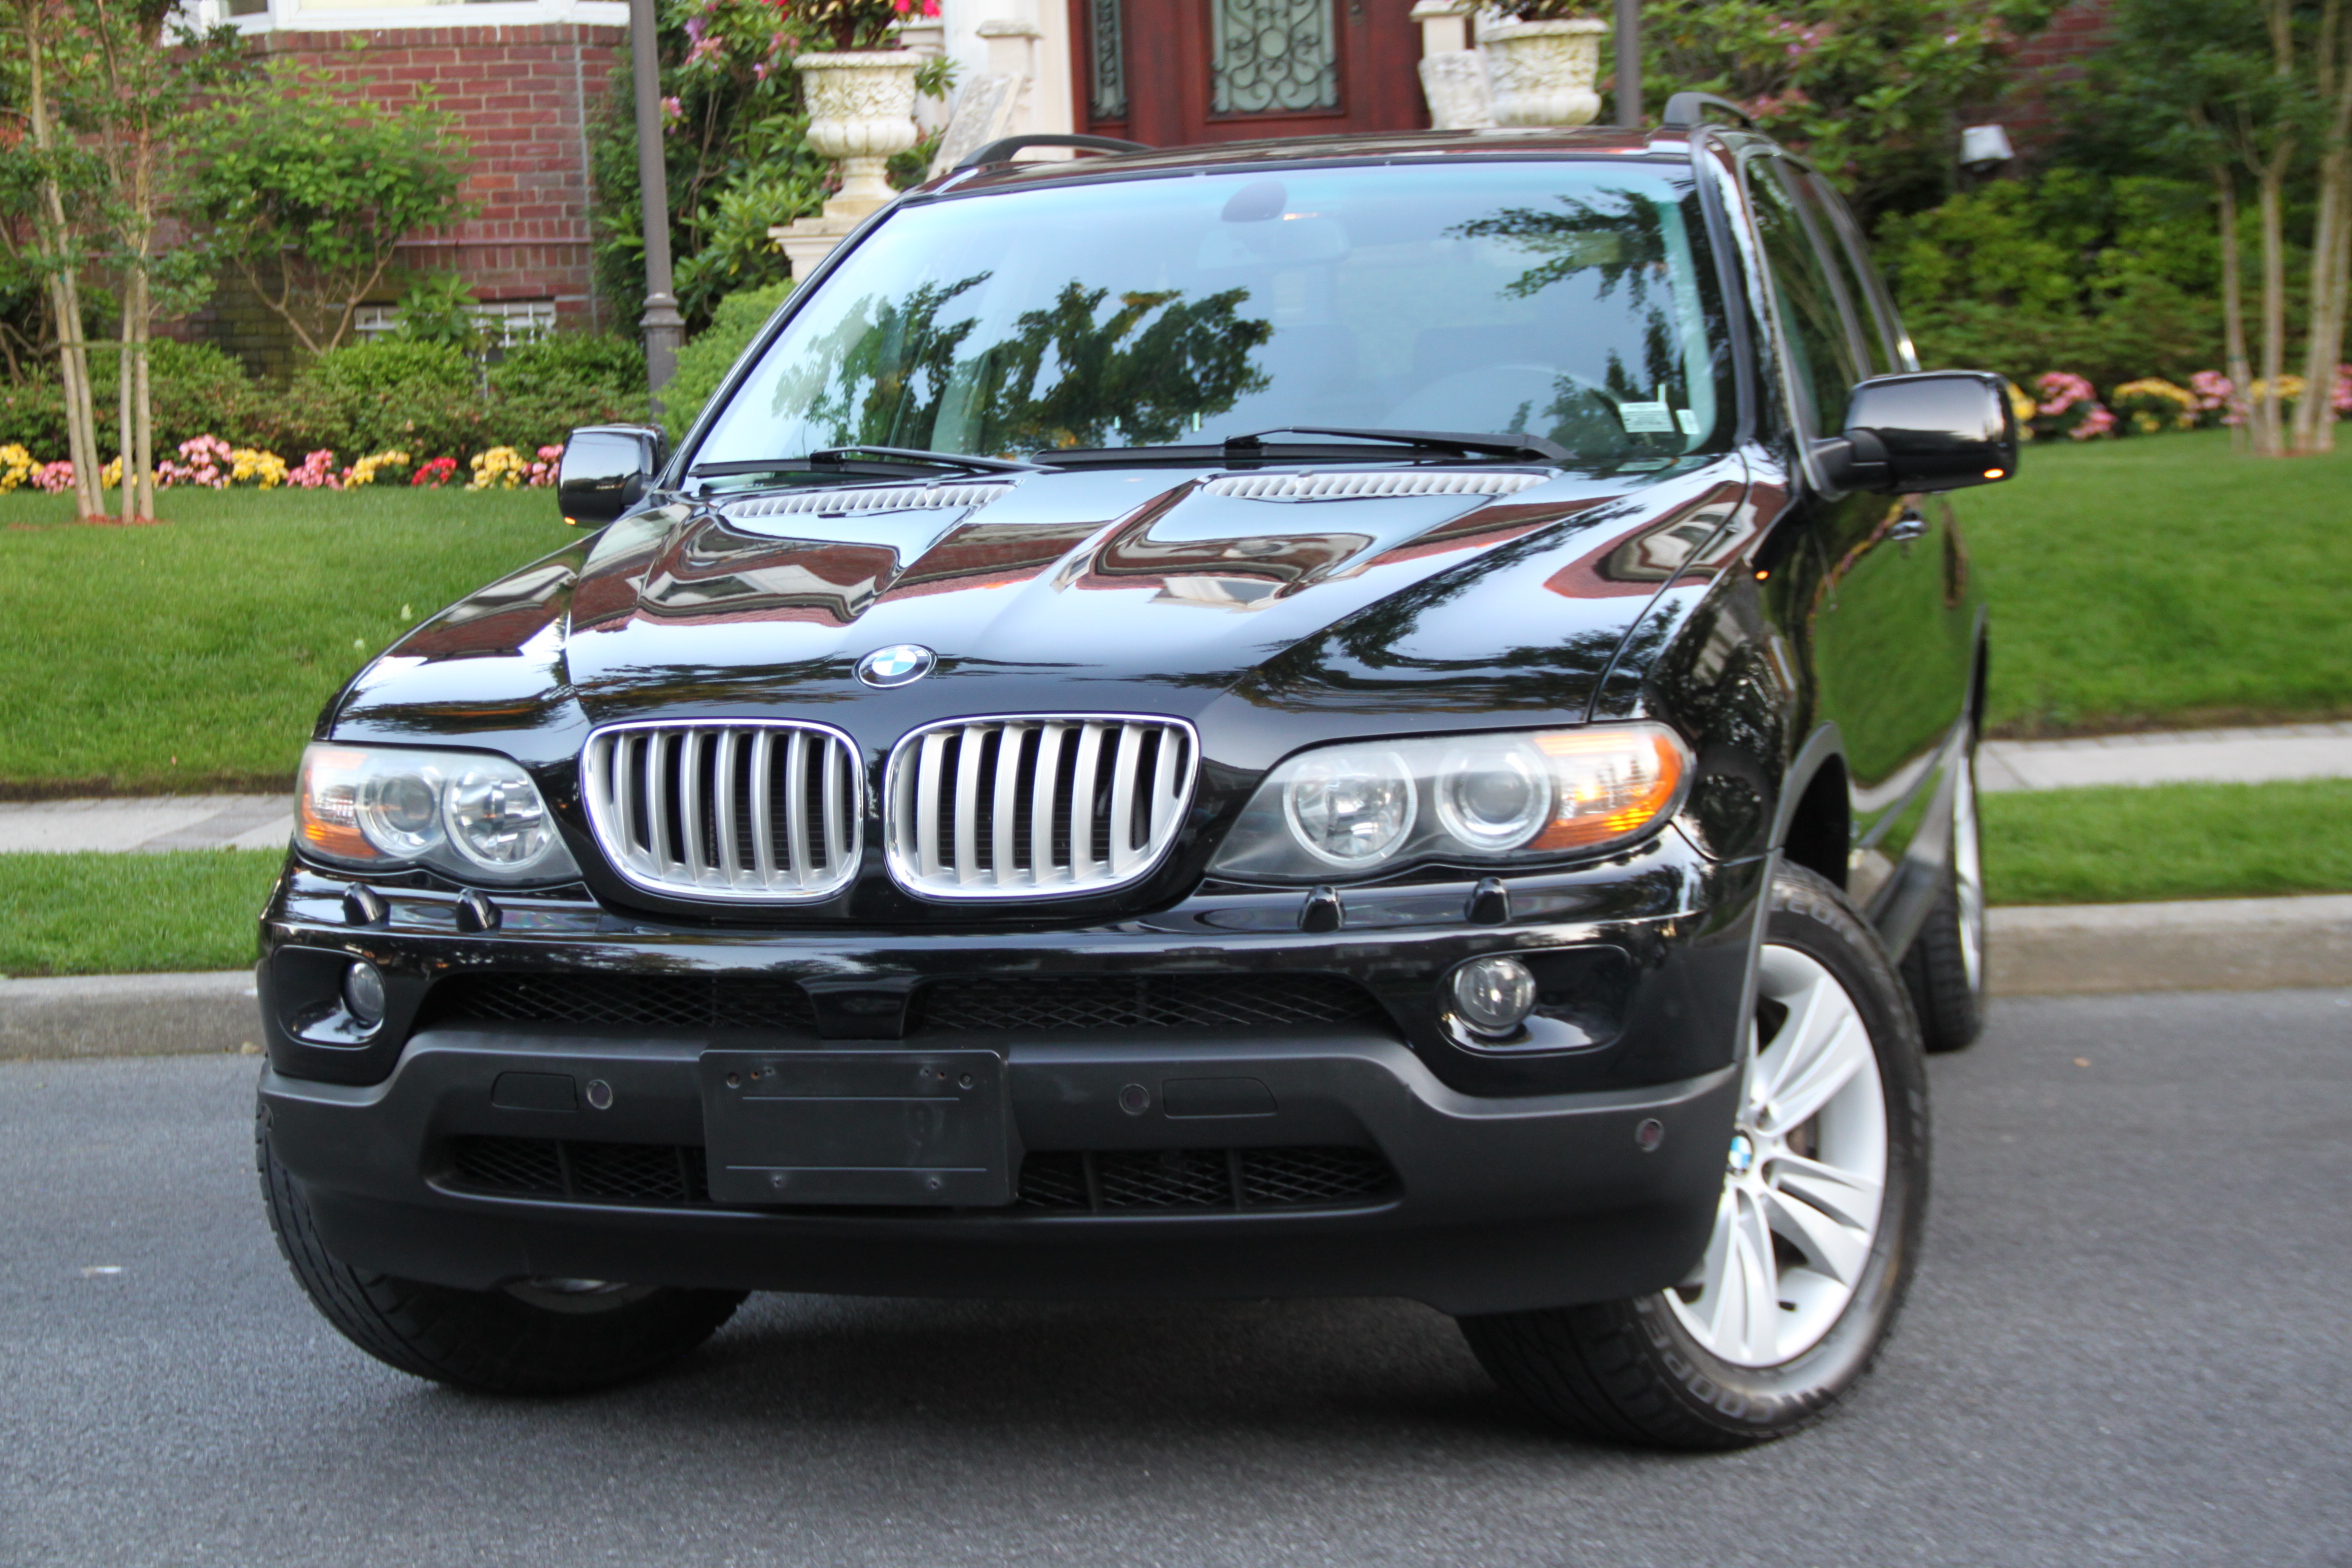 Buy Used 2006 BMW X5 4.4I SPORT for $10 900 from trusted dealer in  Brooklyn, NY!